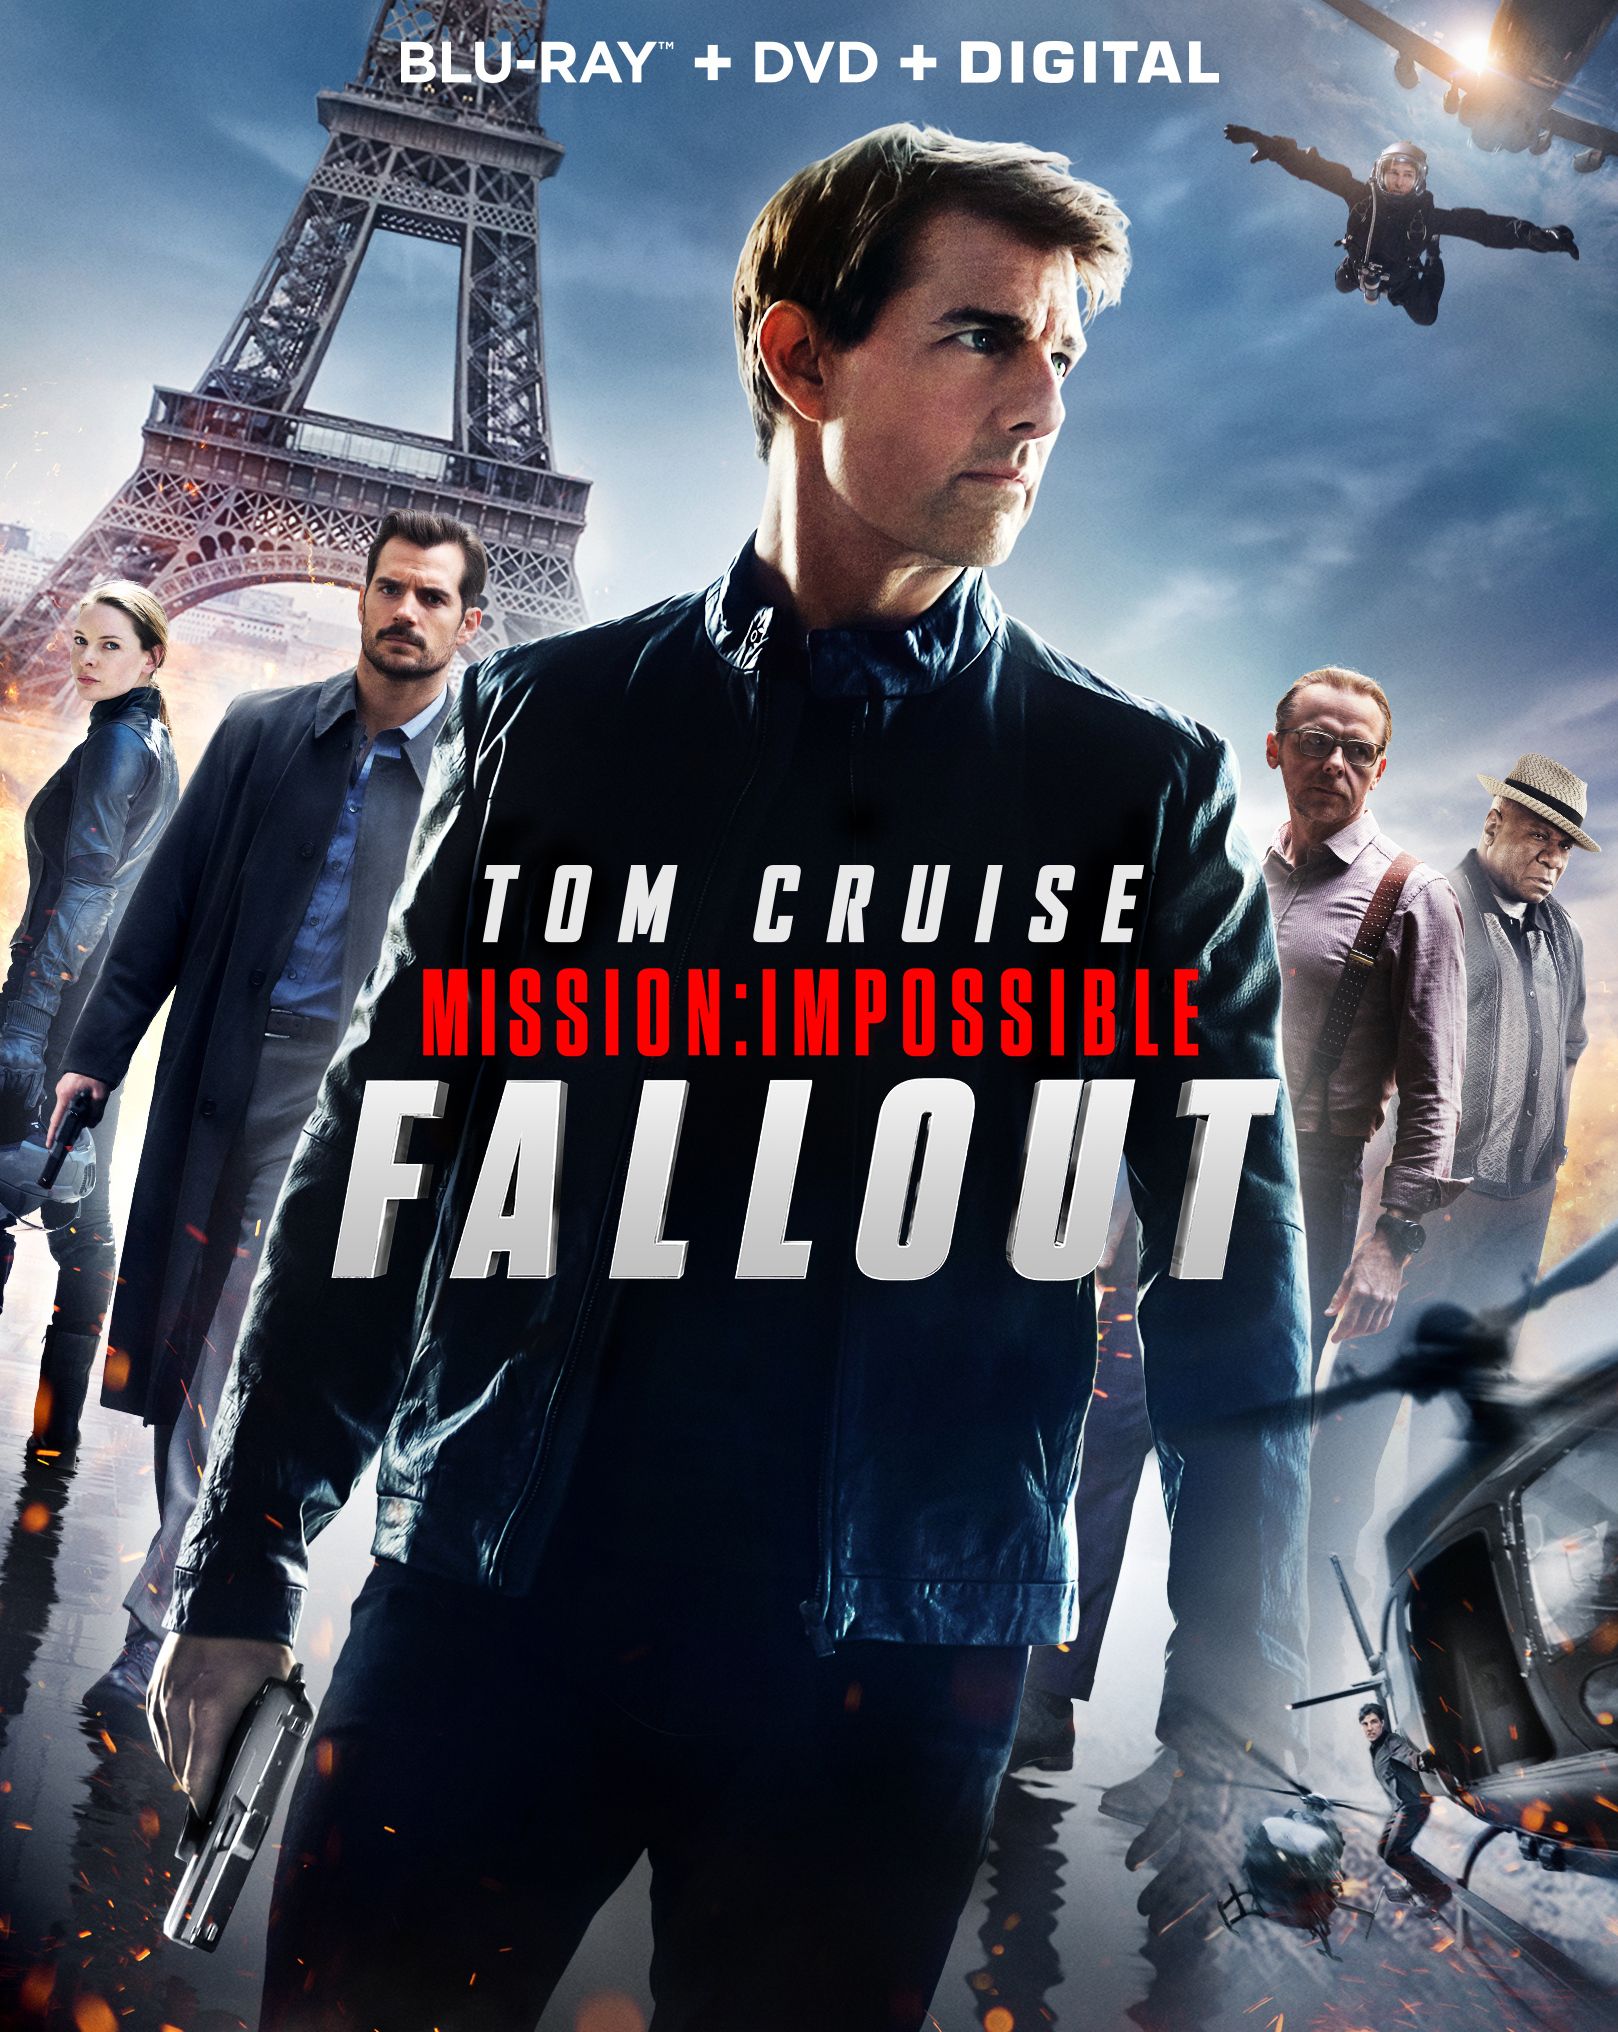 Mission Impossible 6 Fallout Blu-ray and DVD cover